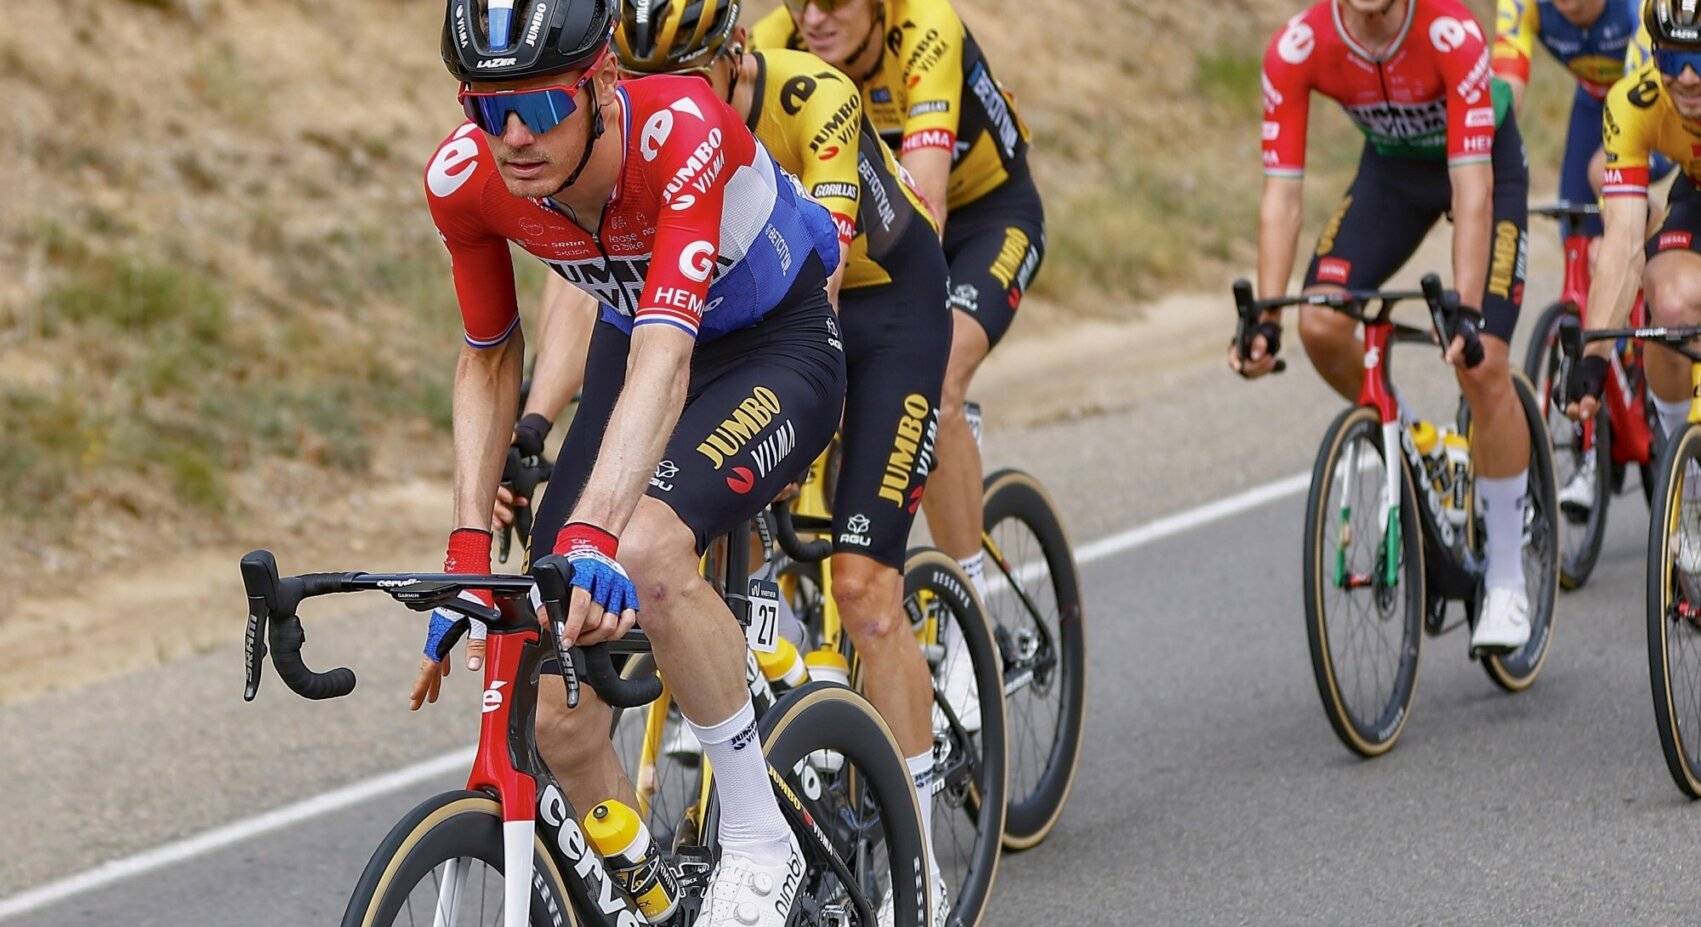 Mixed feelings for Team Jumbo-Visma after fast and hectic stage at Vuelta a España	